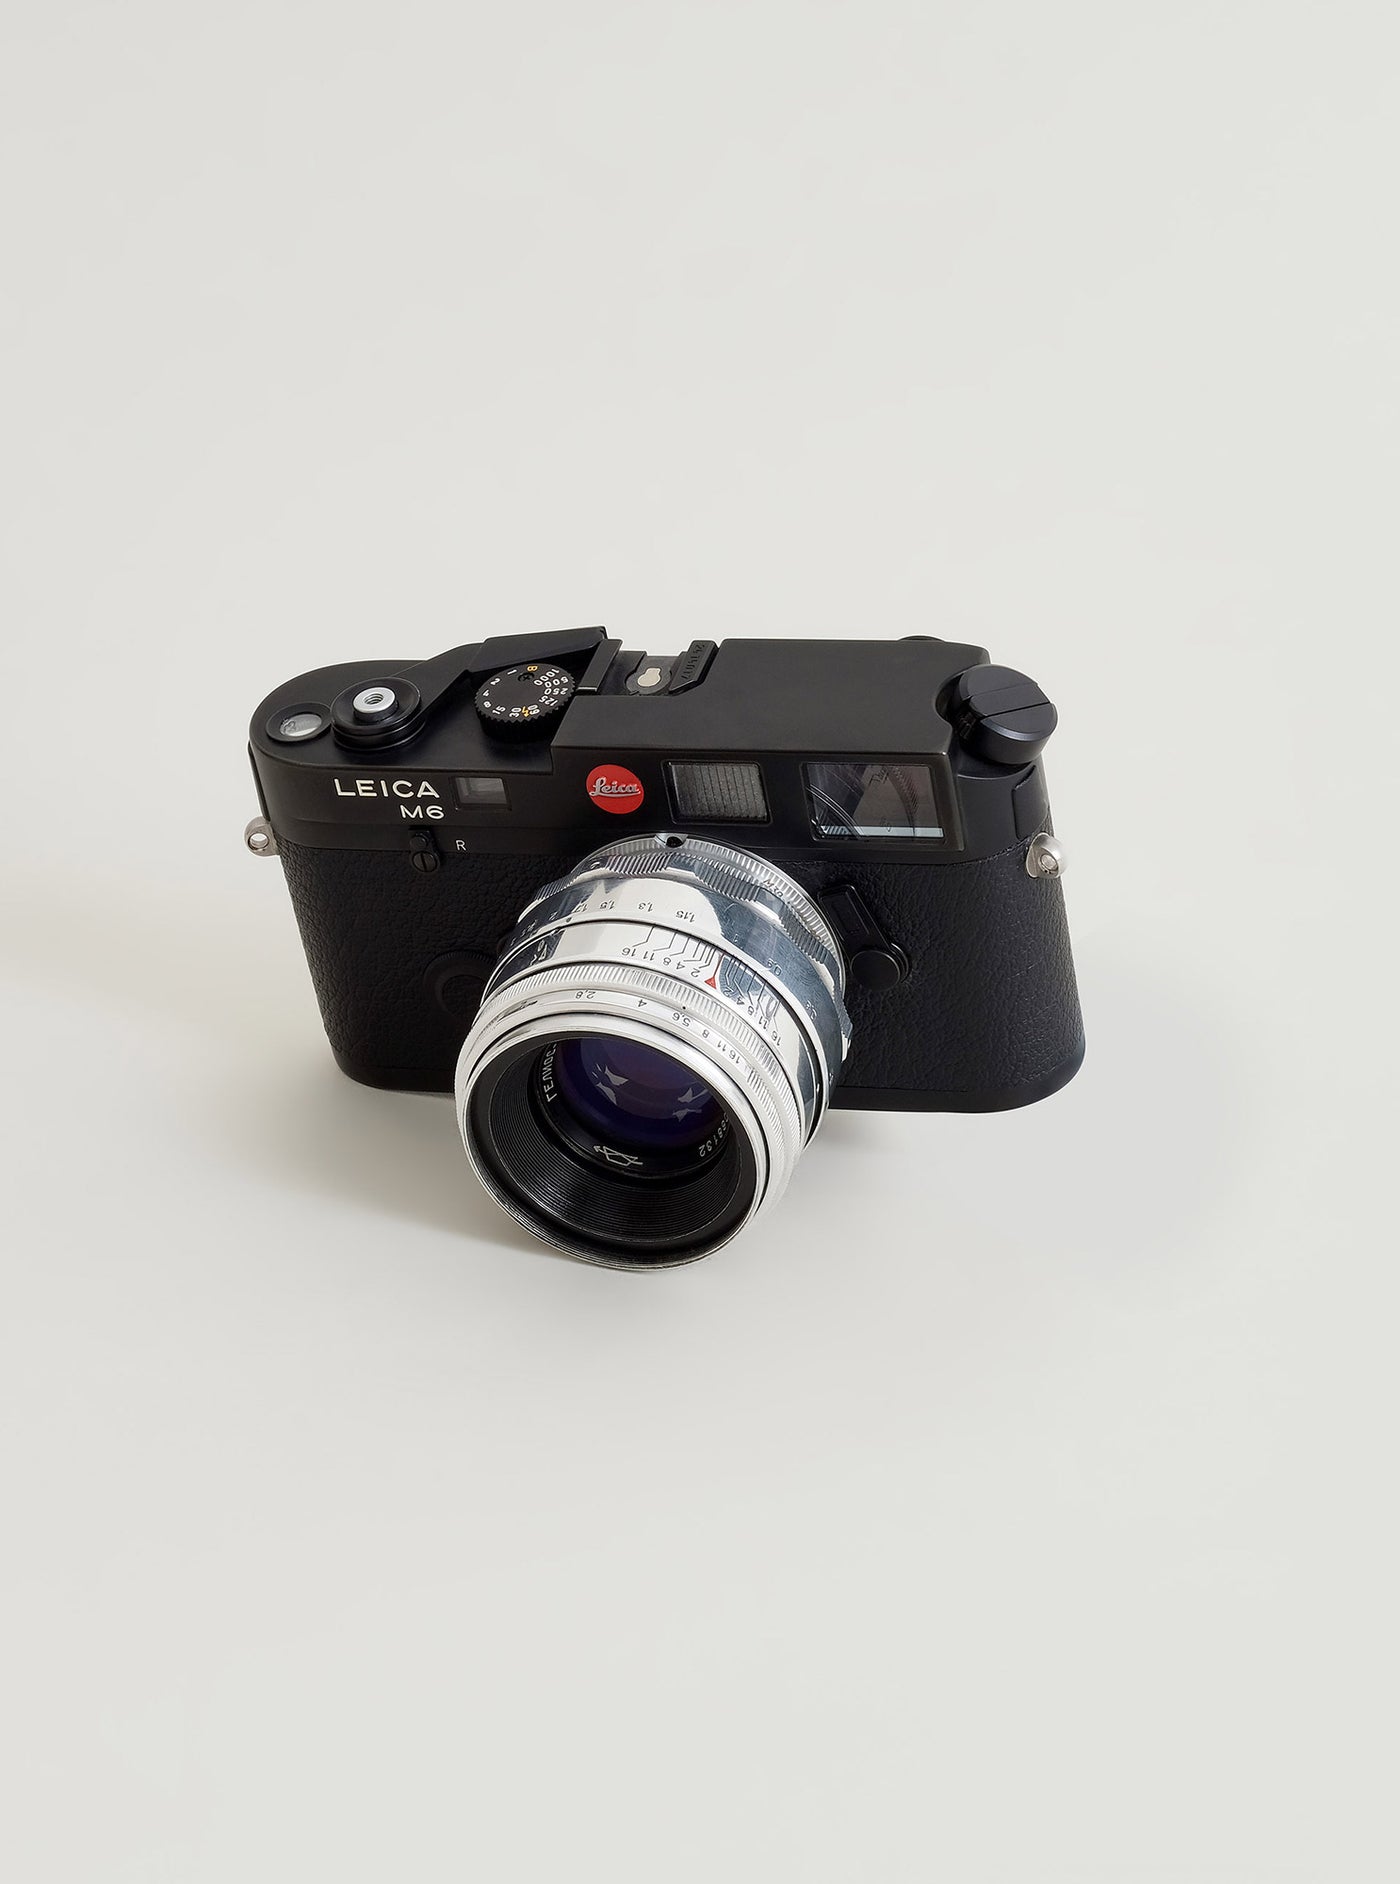 M39 Lens Mount to Leica M Camera Mount (35-135mm Frame Lines)